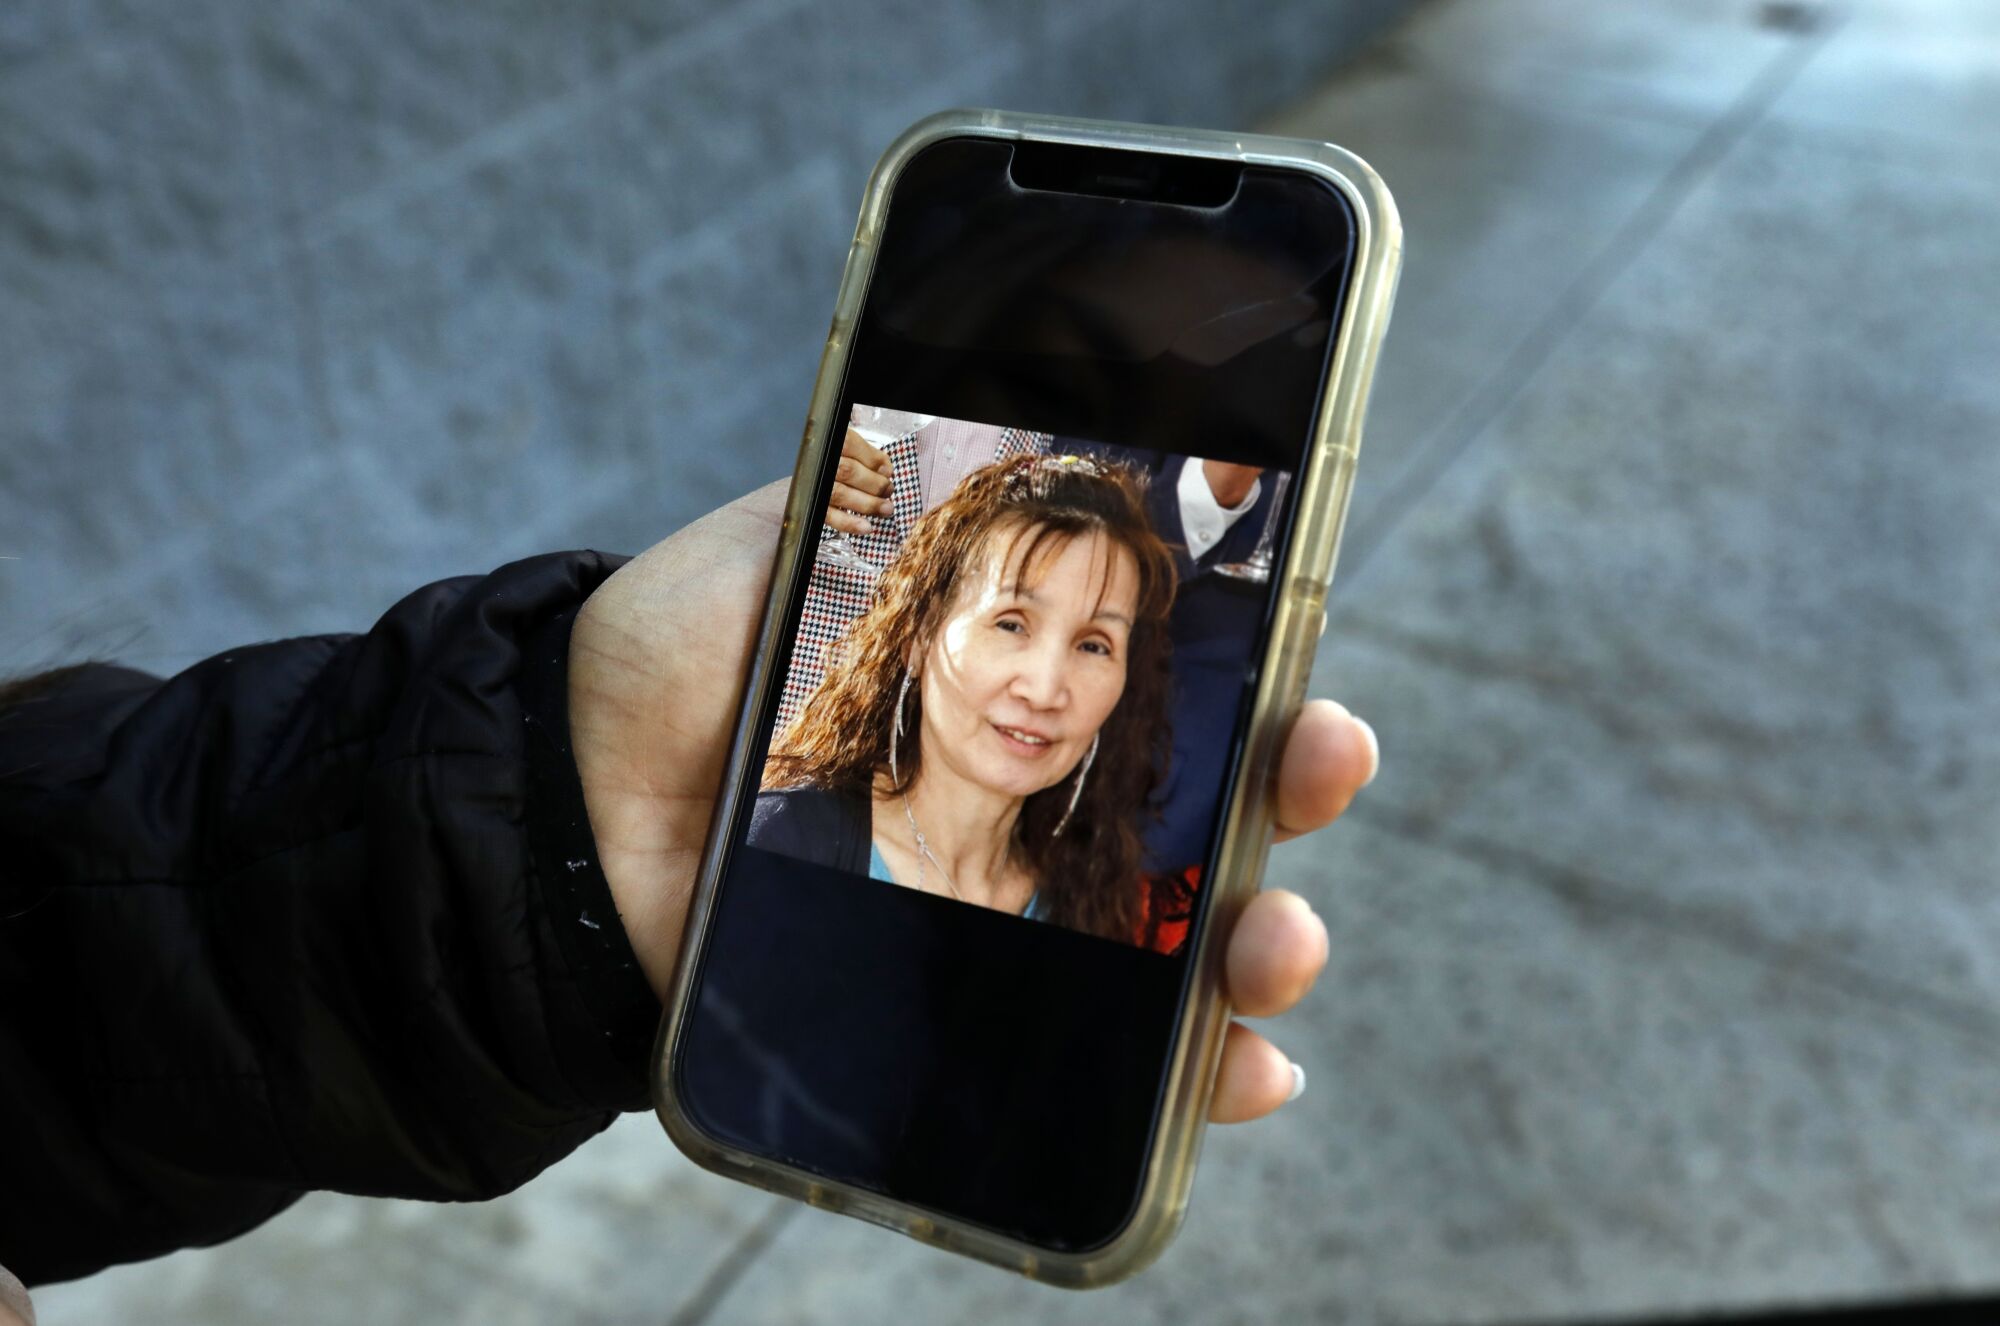 A hand holding a phone with a portrait of an Asian woman lightly smiling.